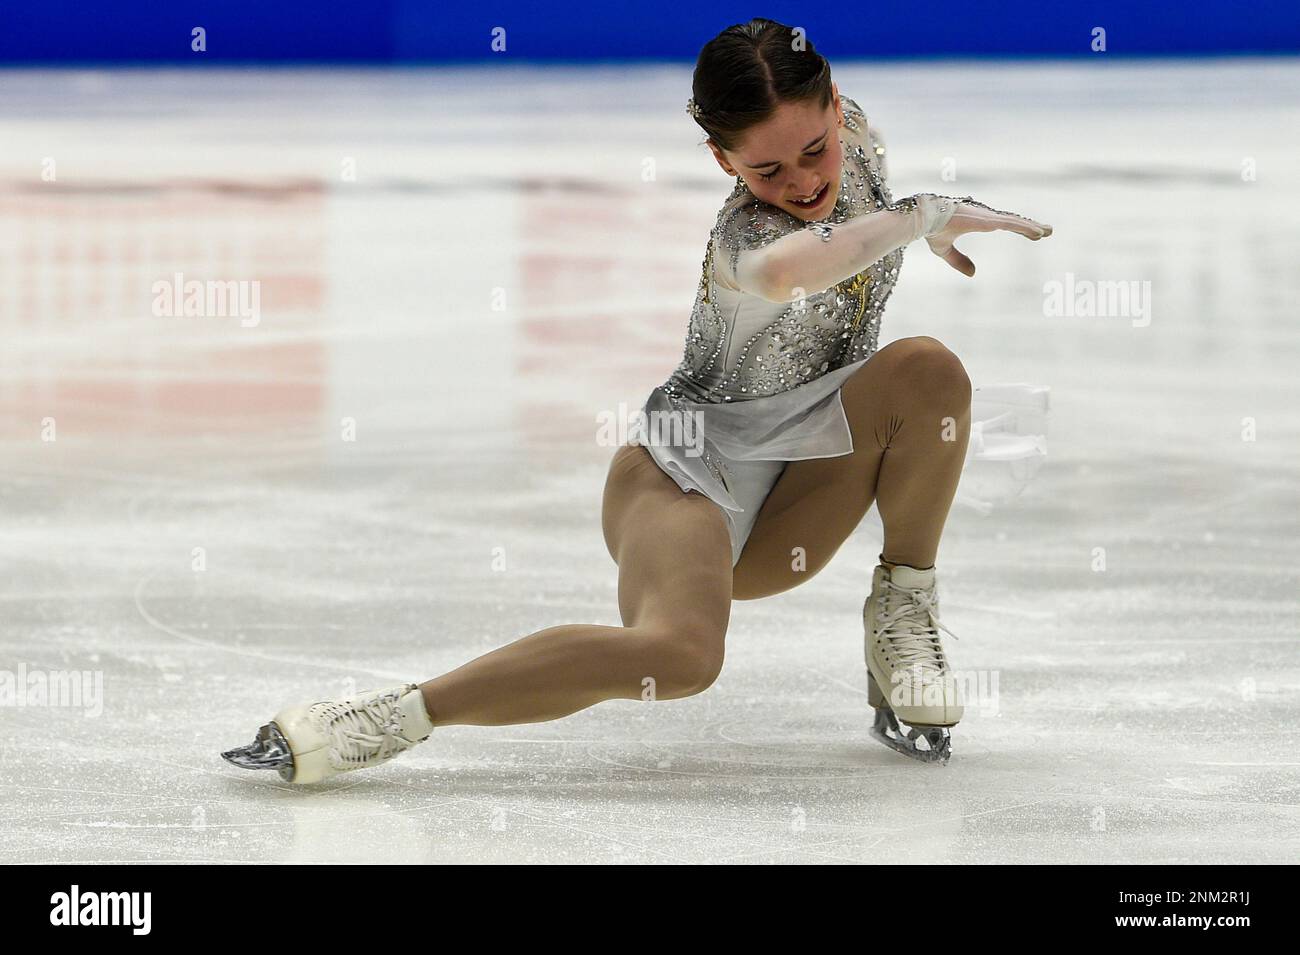 NASHVILLE, TN - JANUARY 06: Isabeau Levito of SC Of Southern New Jersey  performs during the championship ladies short program during the U.S.  Figure Skating Championships at Bridgestone Arena on January 6,